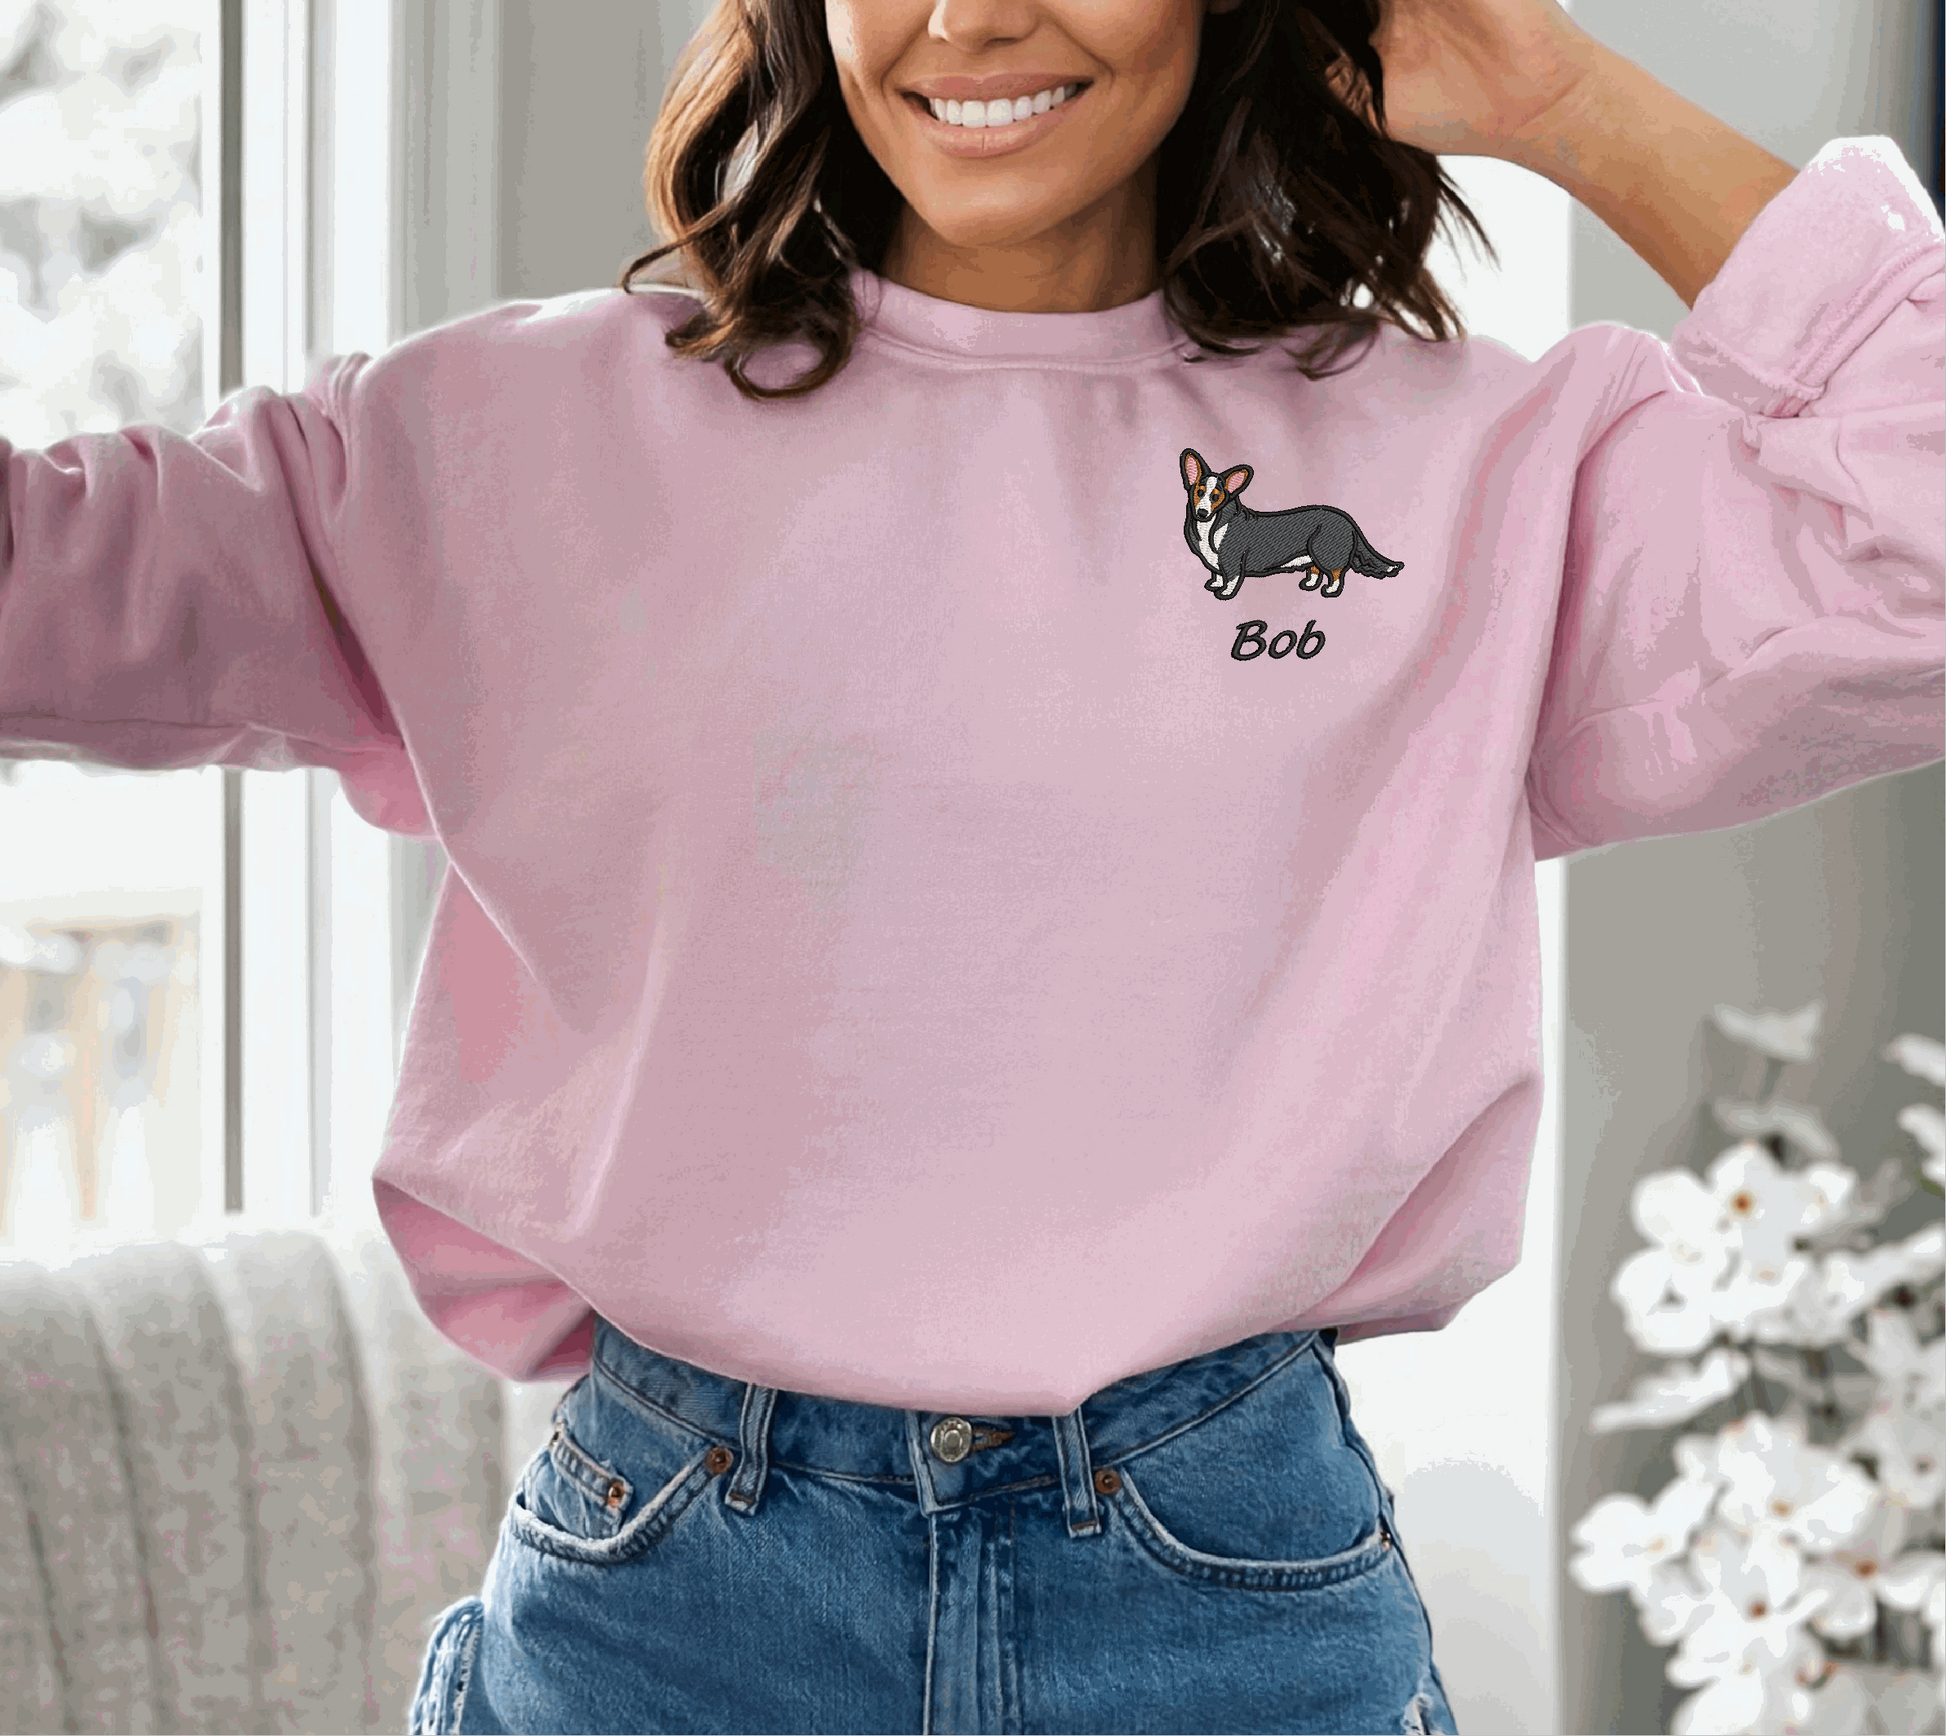 a woman wearing a pink sweater with a dog on it